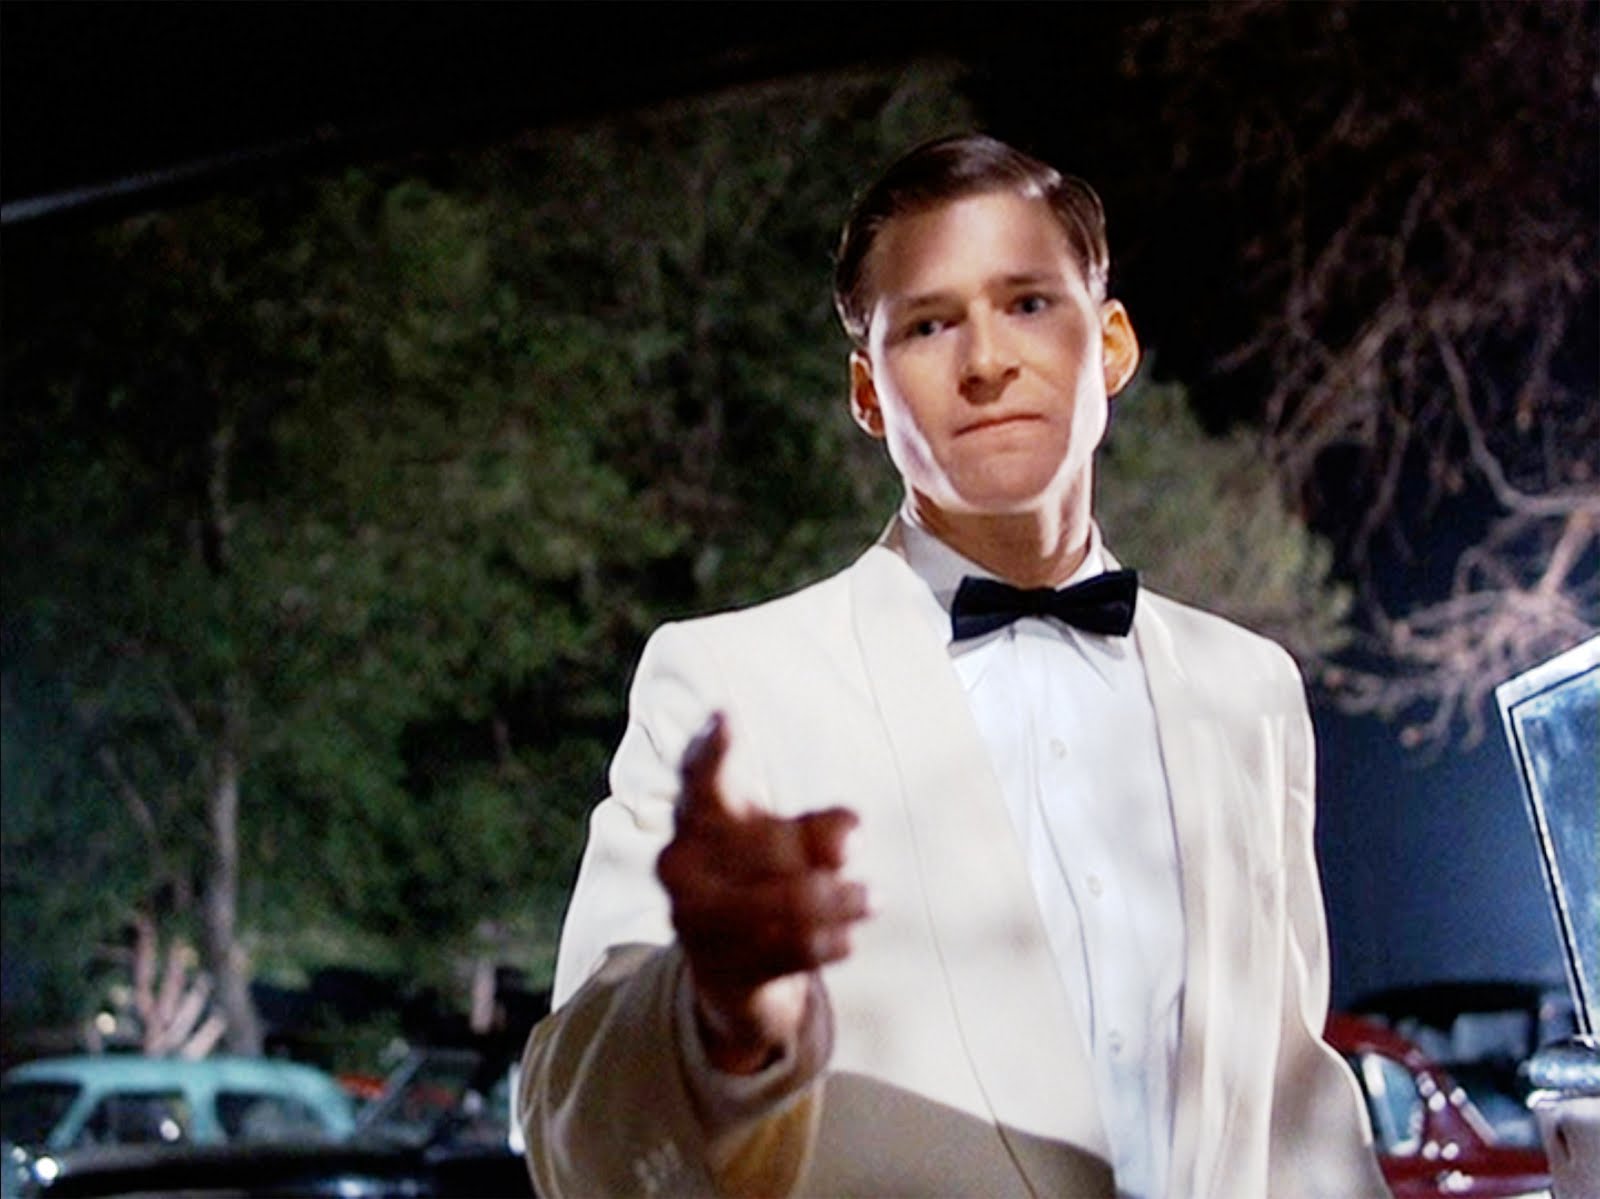 Crispin Glover, who played Michael J Fox's father in Back to the 

Future, is actually younger than him.